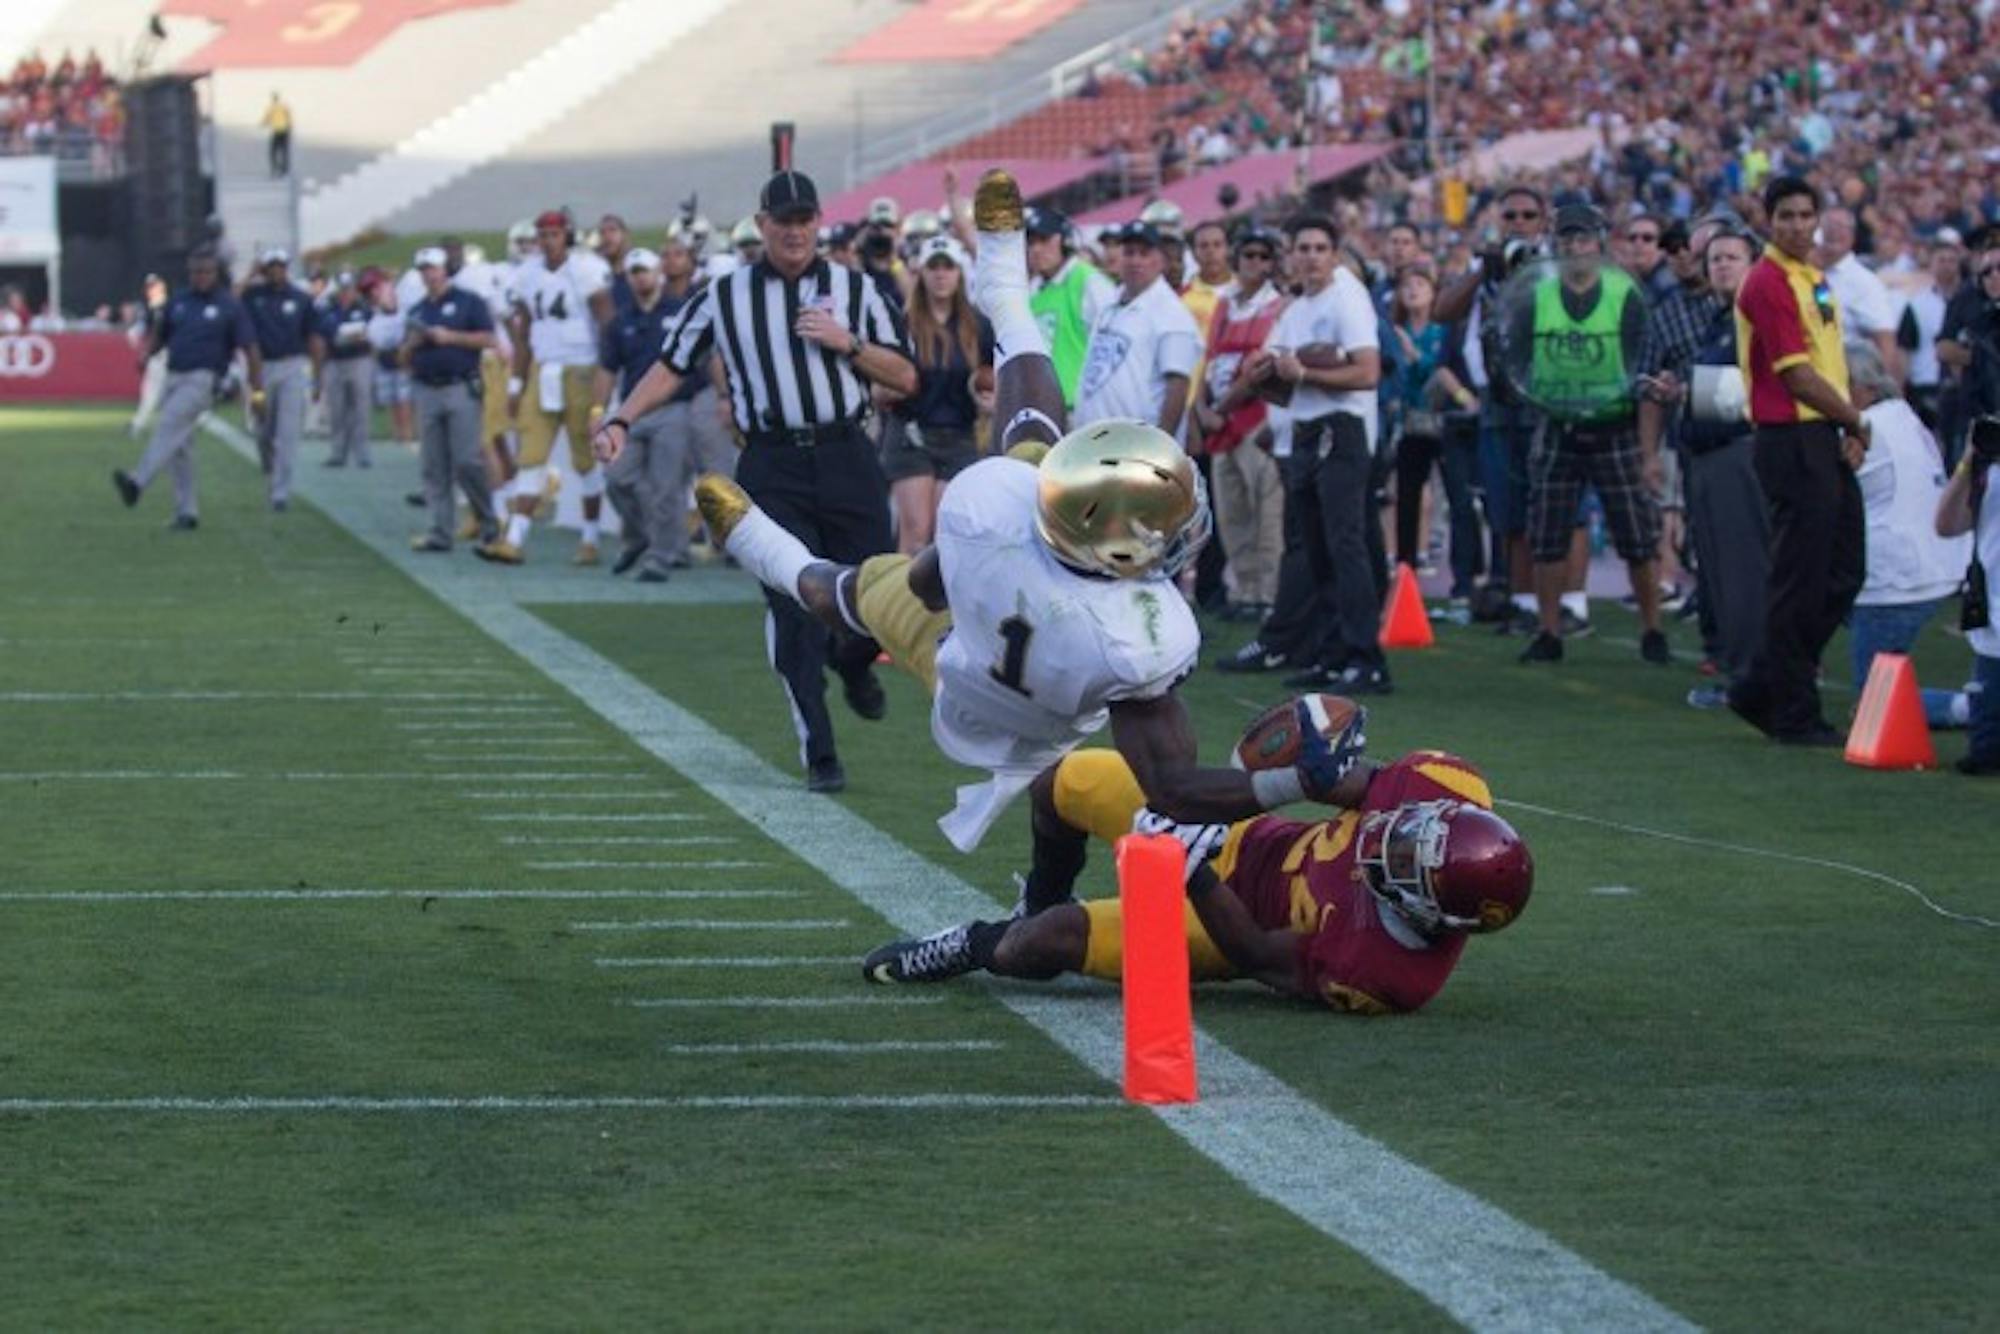 Former Irish running back Greg Bryant attempts to score a touchdown during Notre Dame's 49-14 loss against USC on Nov. 29, 2014, at LA Memorial Coliseum. Bryant was tragically shot on an interstate highway in south Florida on Saturday morning and died a few hours later.